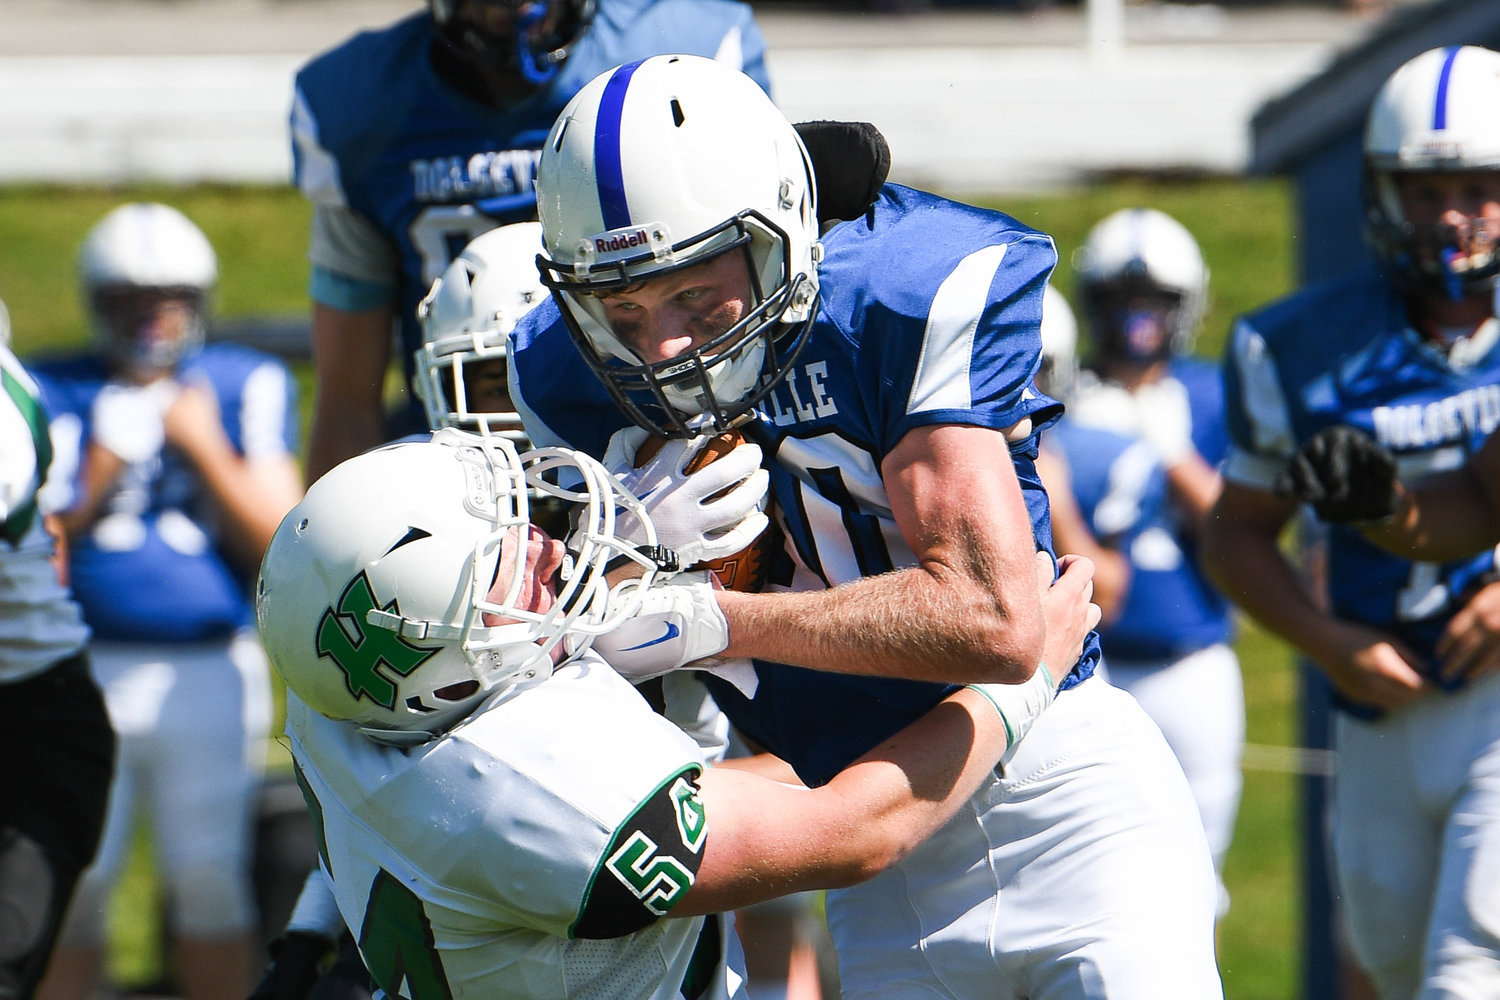 Dolgeville running back Cameron Dager rushes through Herkimer defender Michael Goodson during the Class D game on Saturday. The Blue Devils won 68-20.